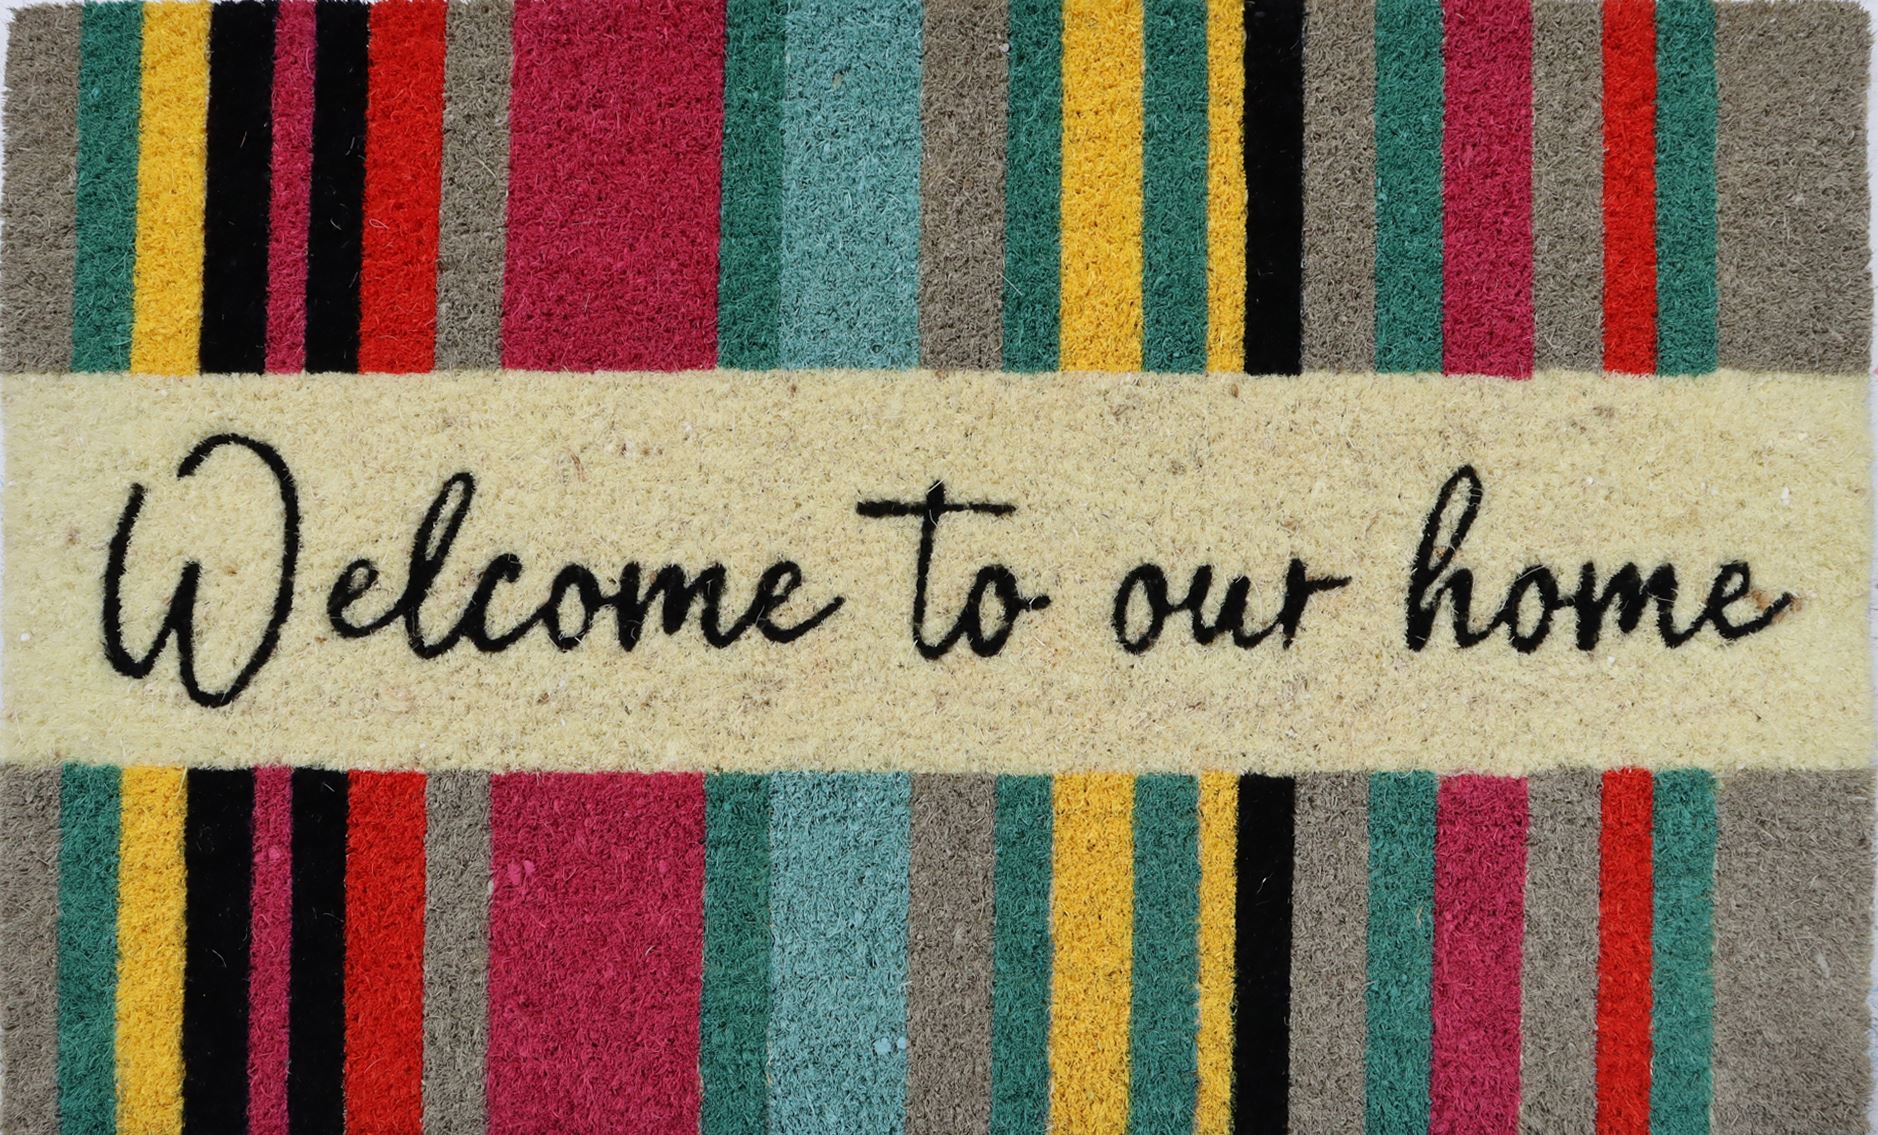 MS WELCOME TO OUR HOME STRIPE - image 1 of 1